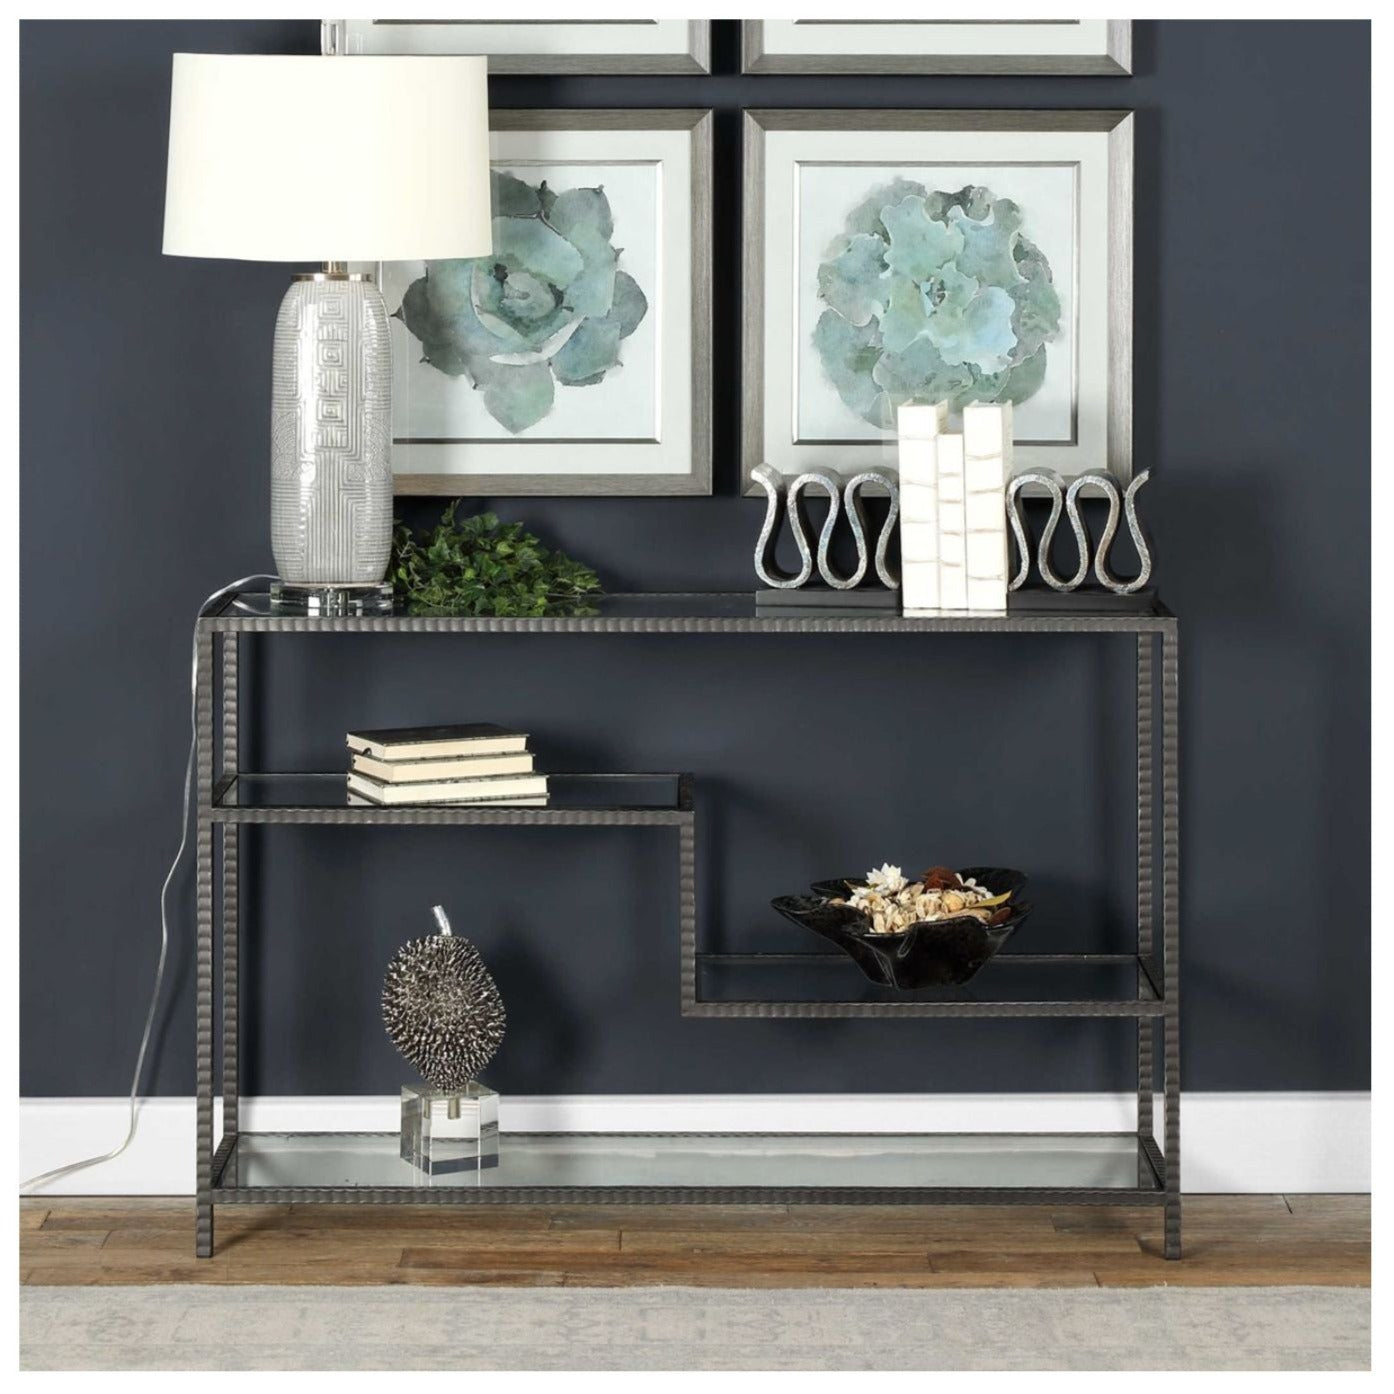 ribbed iron finished  console in an aged gunmetal with a light rust patina. Shelves are clear tempered glass decorated with a lamp, sculpture, books, bowl and book ends with overhead art..